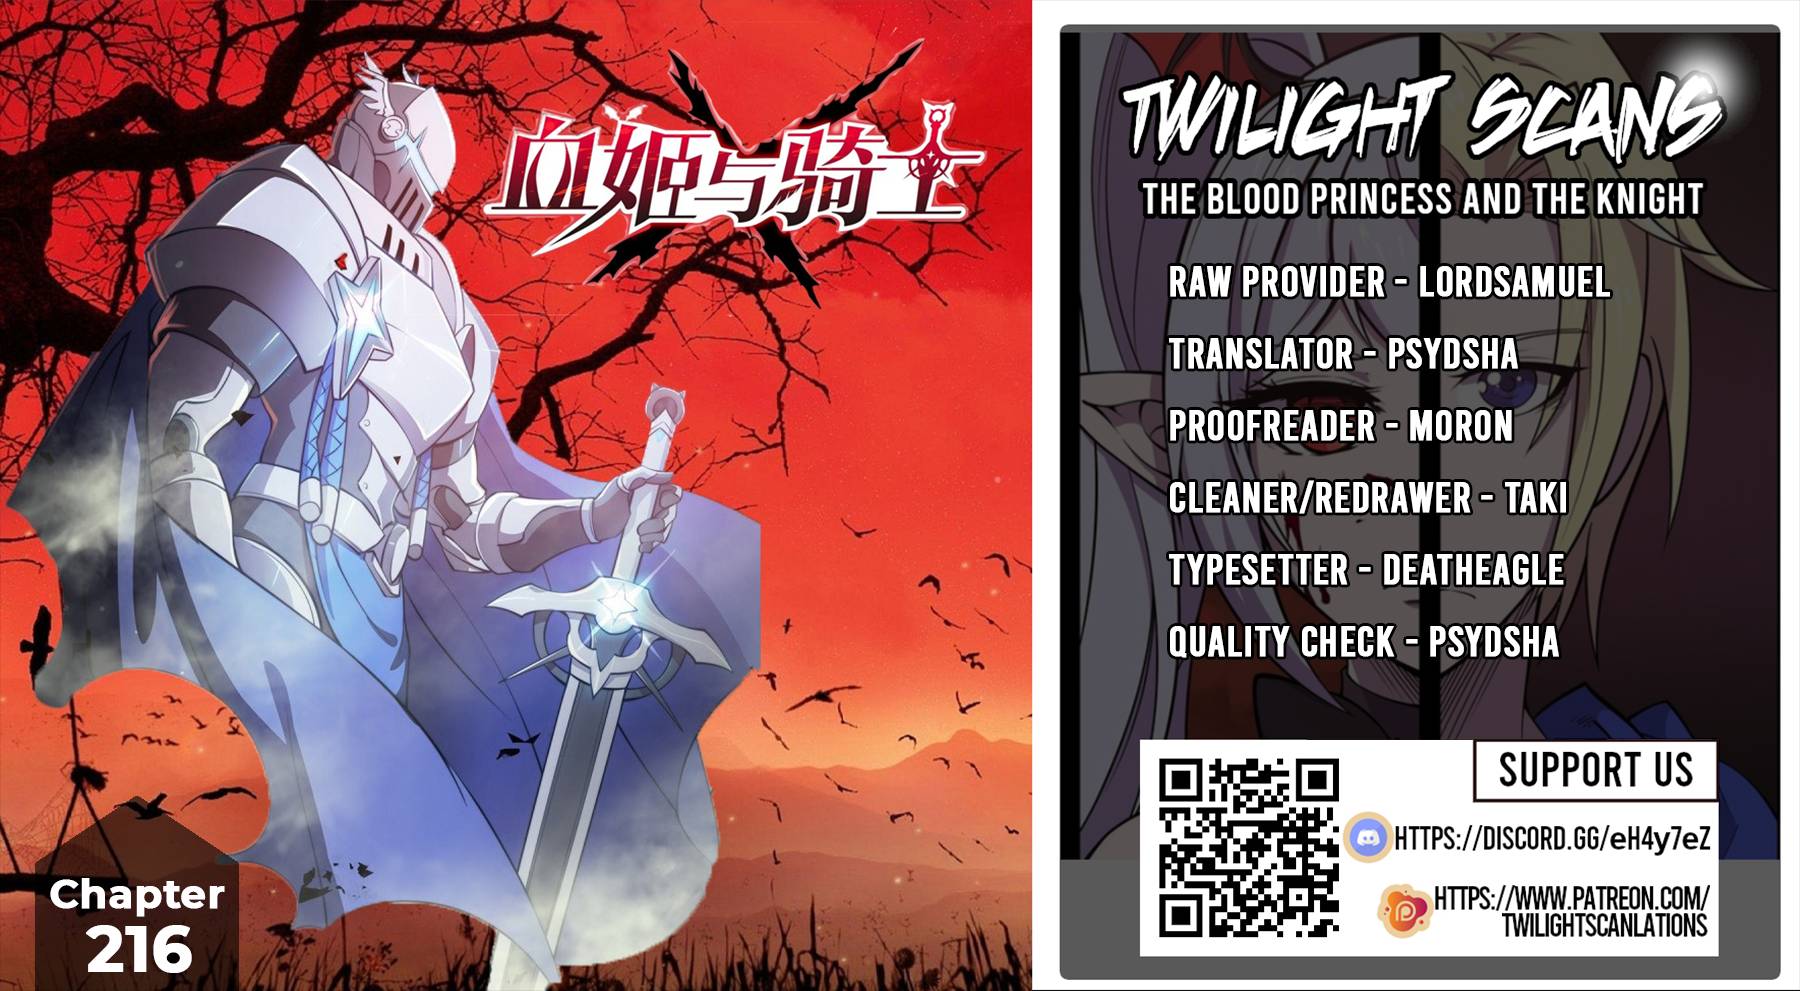 The Blood Princess And The Knight - MANHWATOP